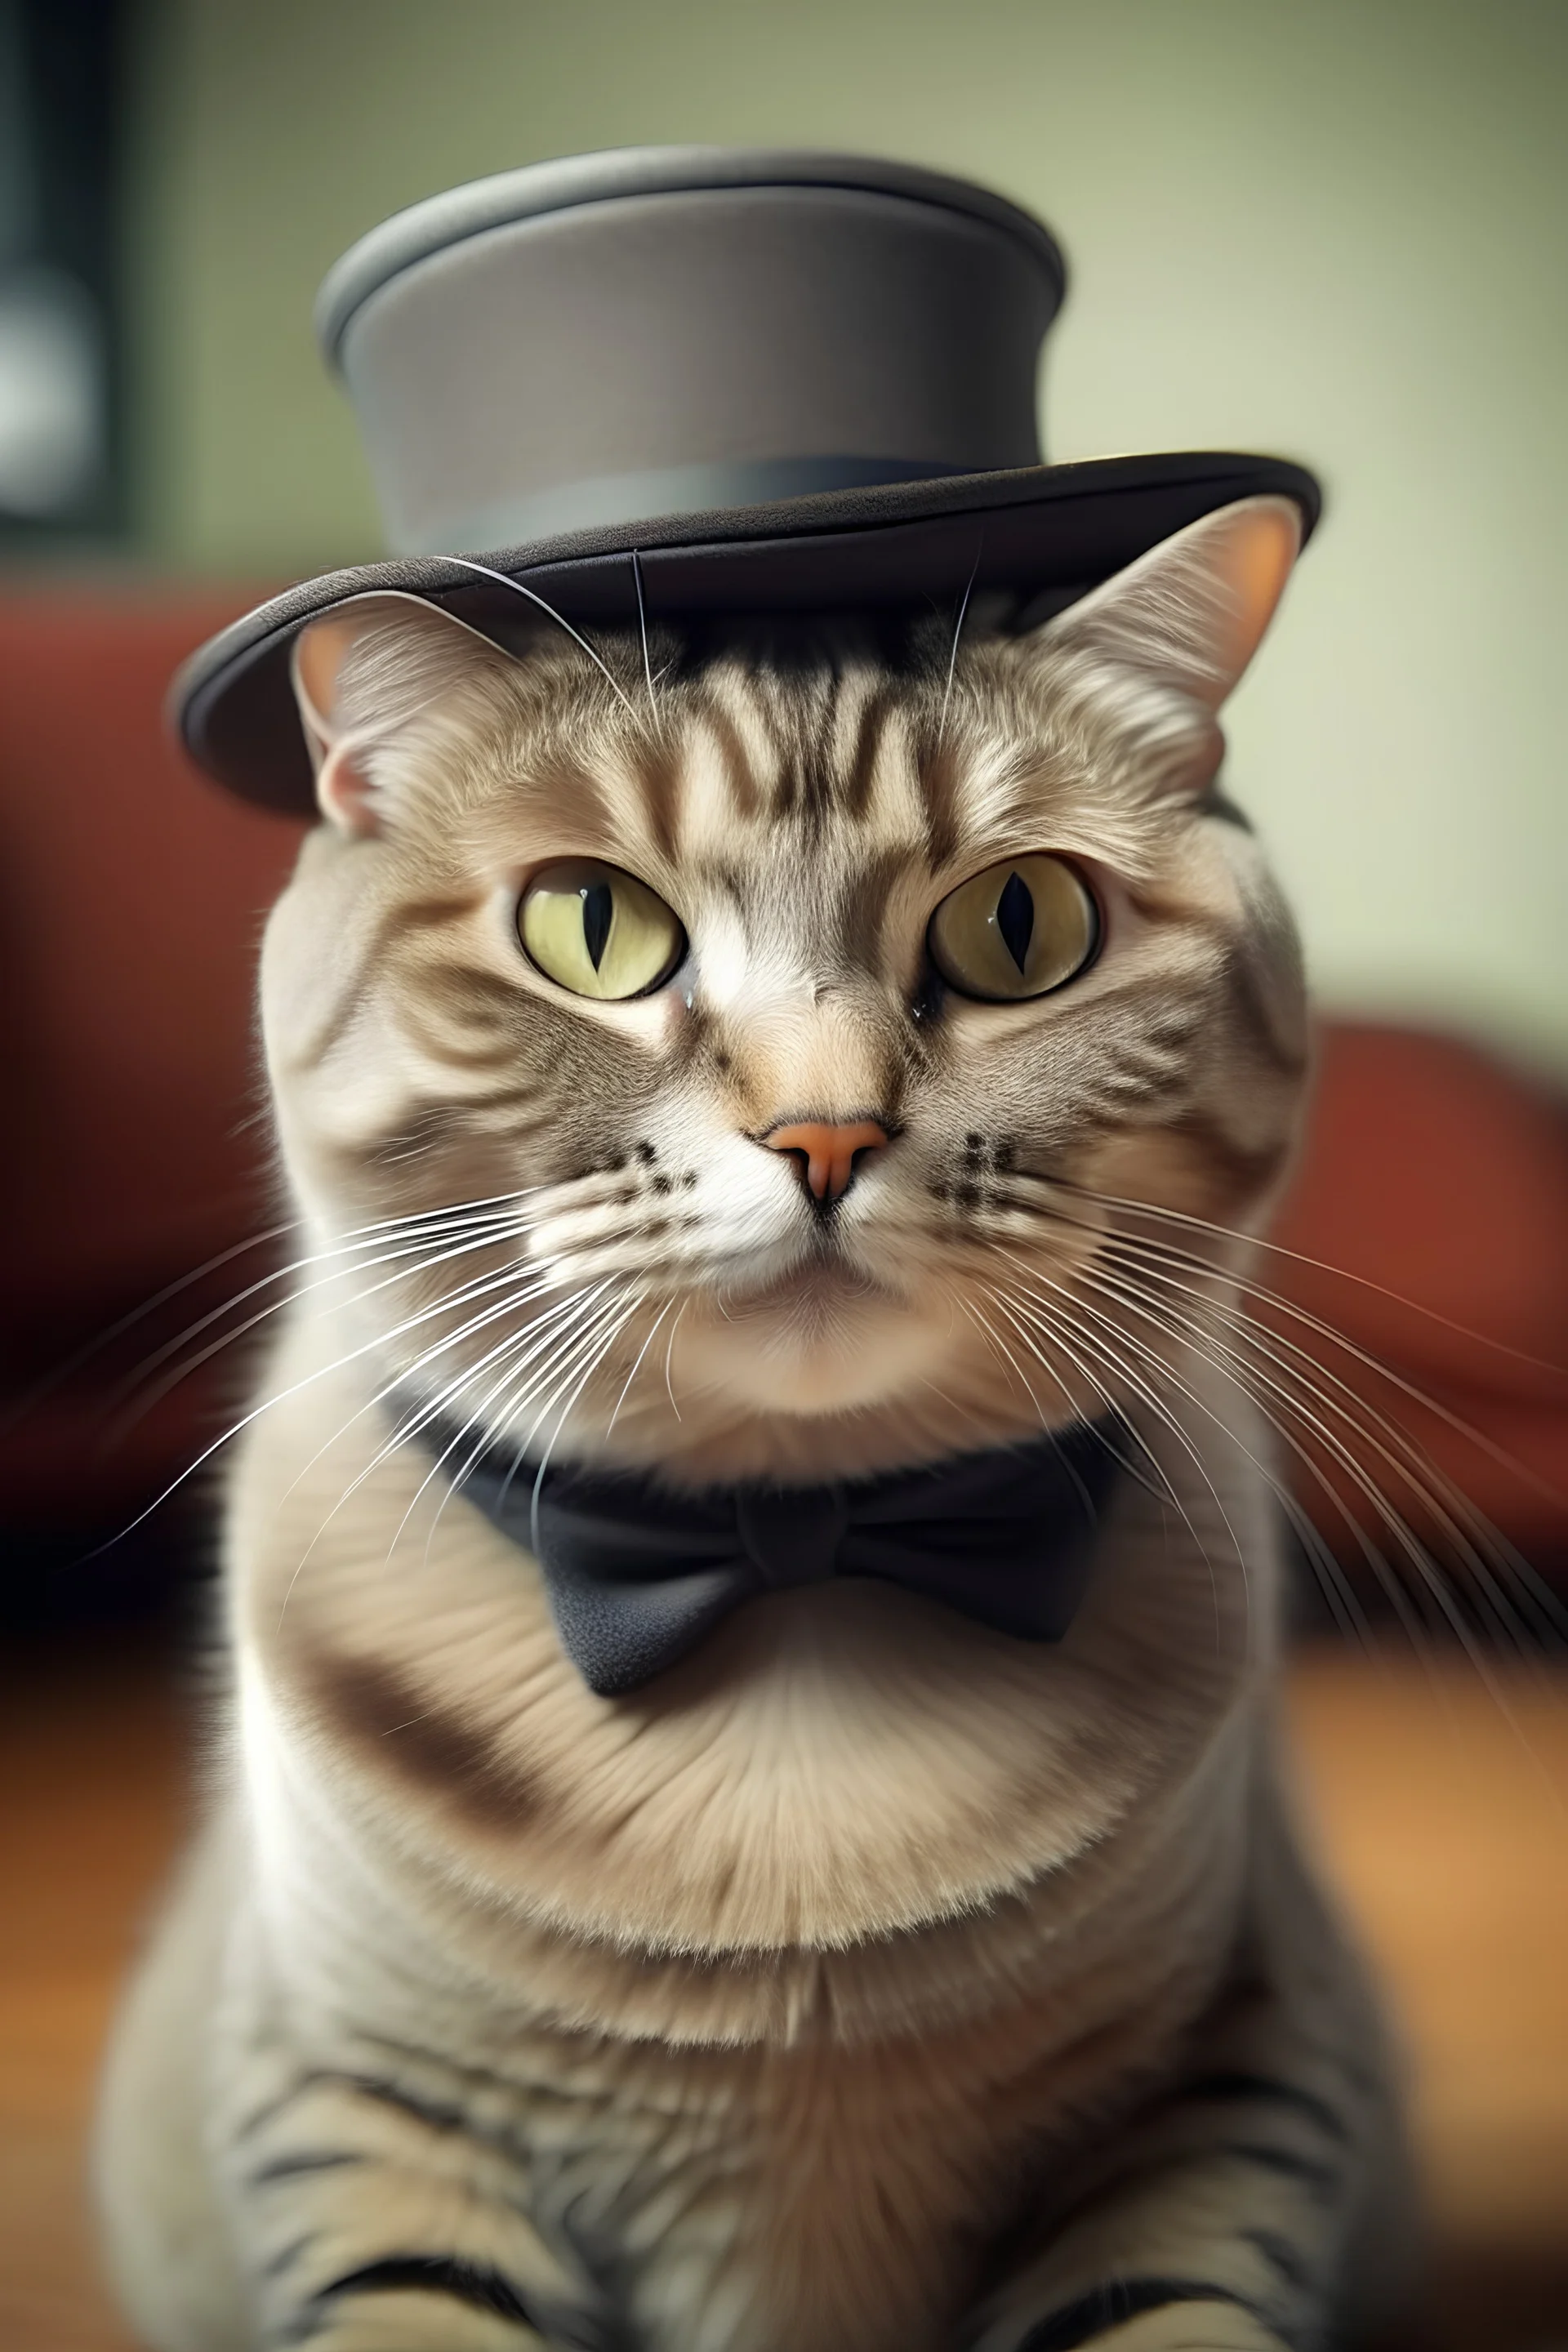 create a cat with hat on